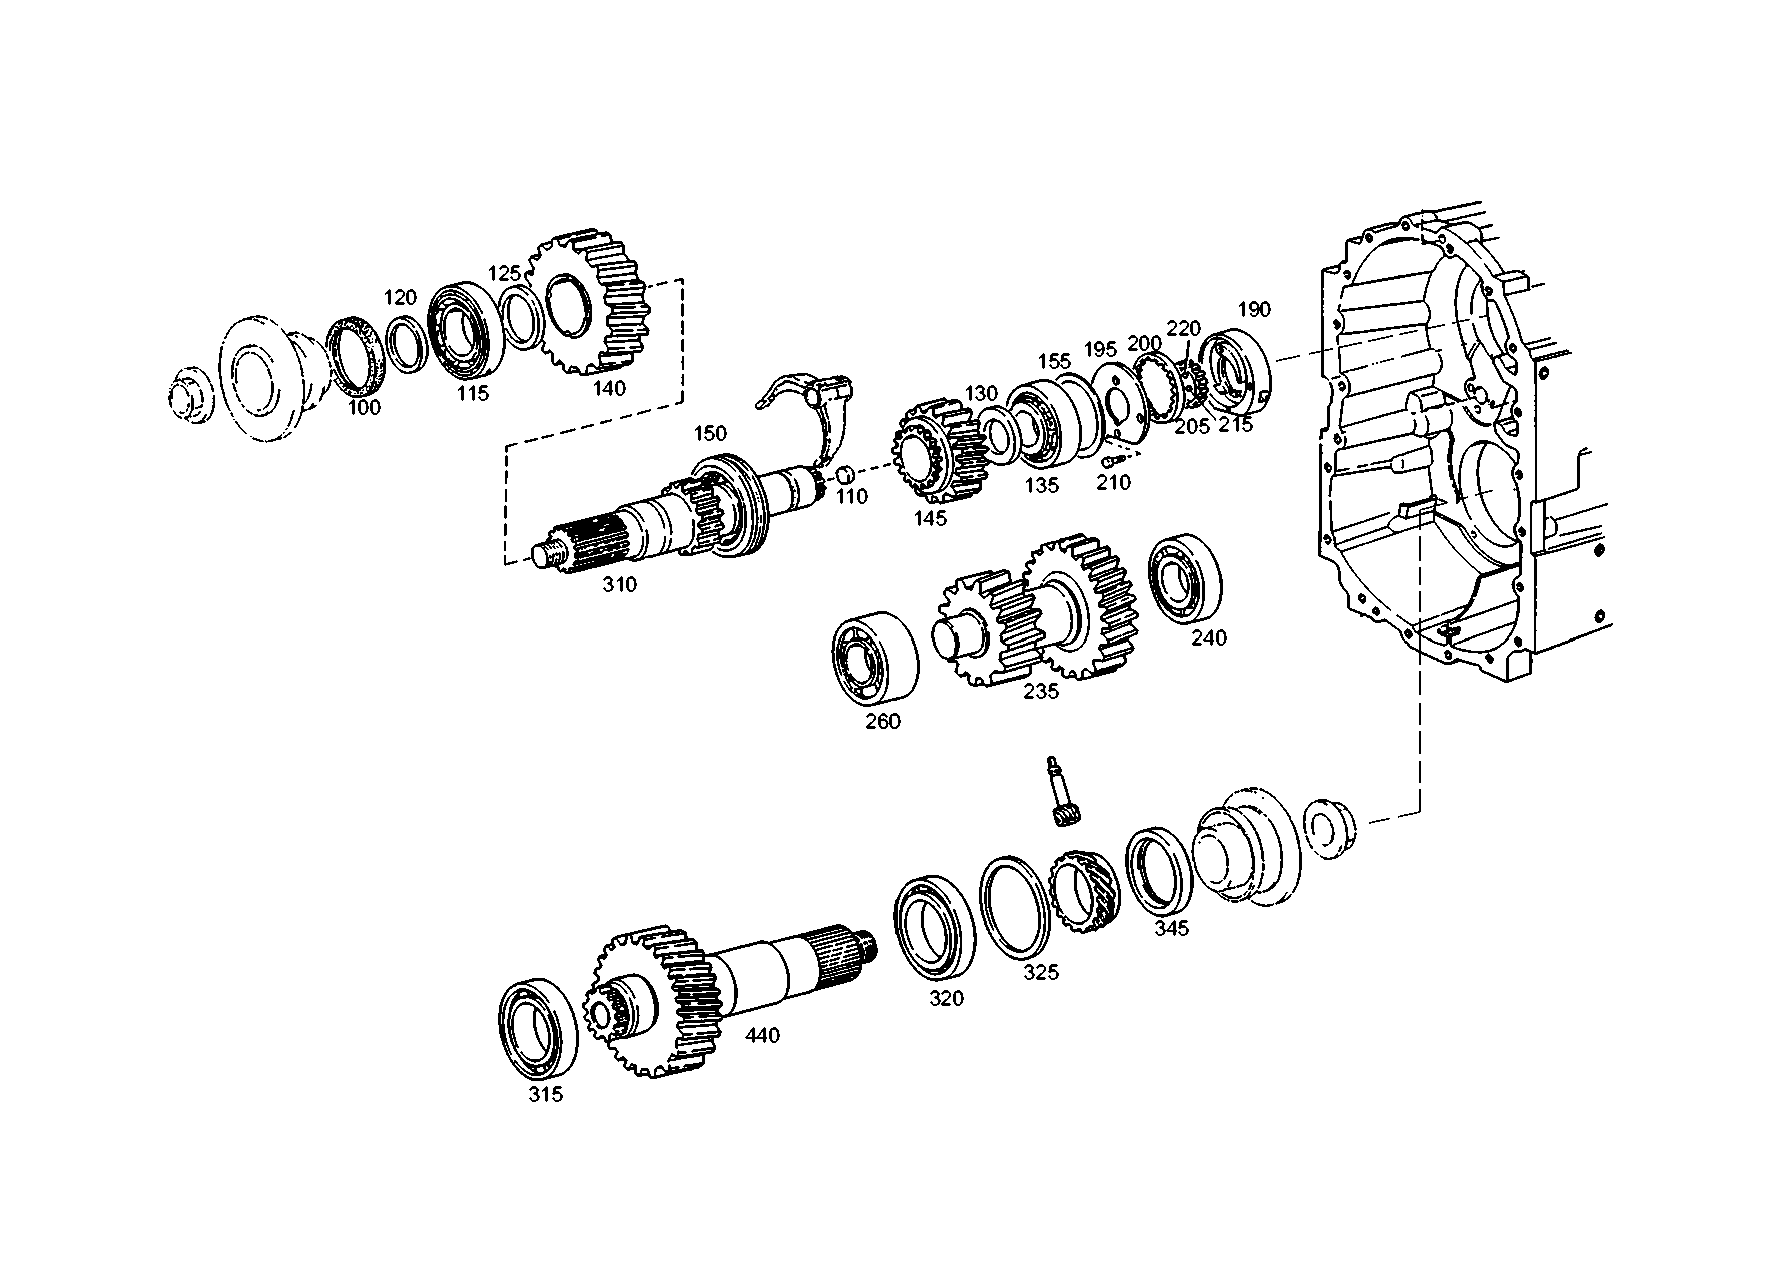 drawing for RABA 1-99-907-053 - WASHER (figure 4)